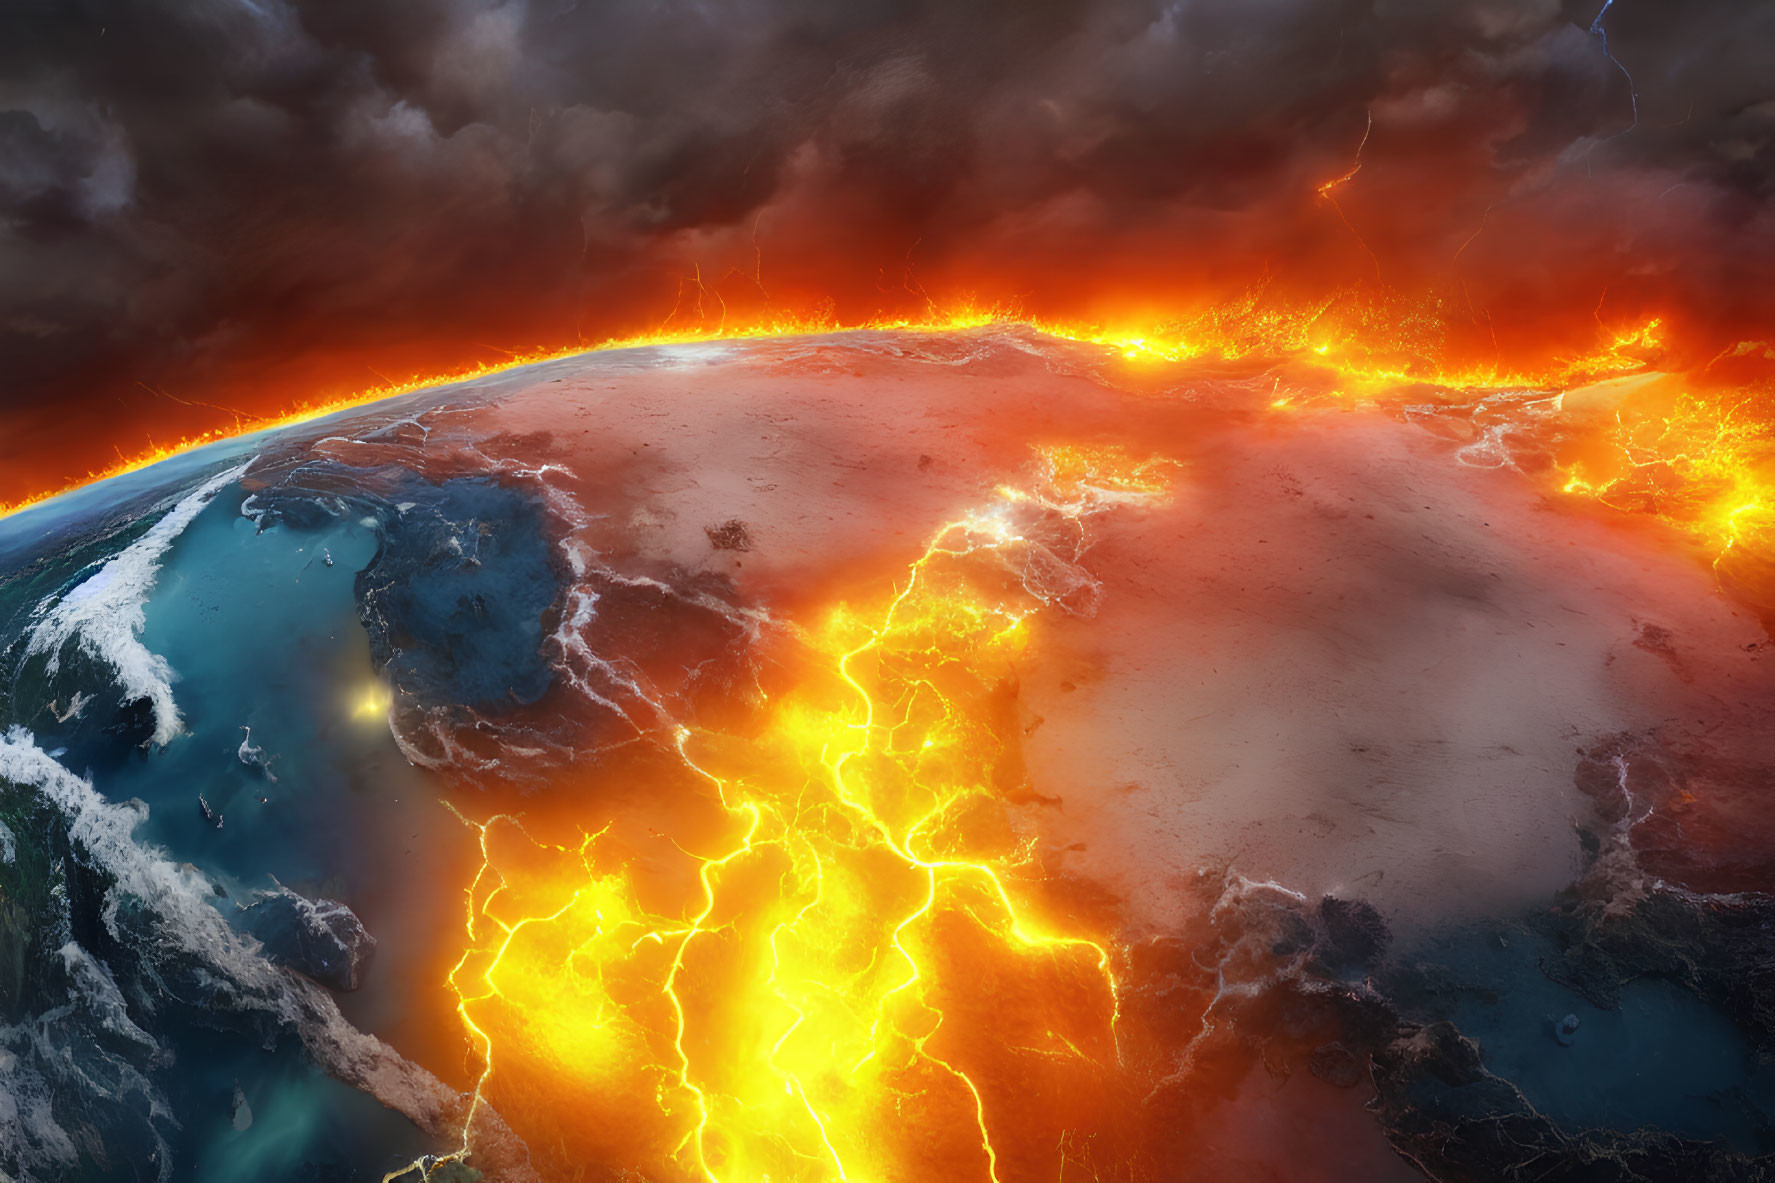 Half of Earth engulfed in fiery cracks, other half under stormy sky